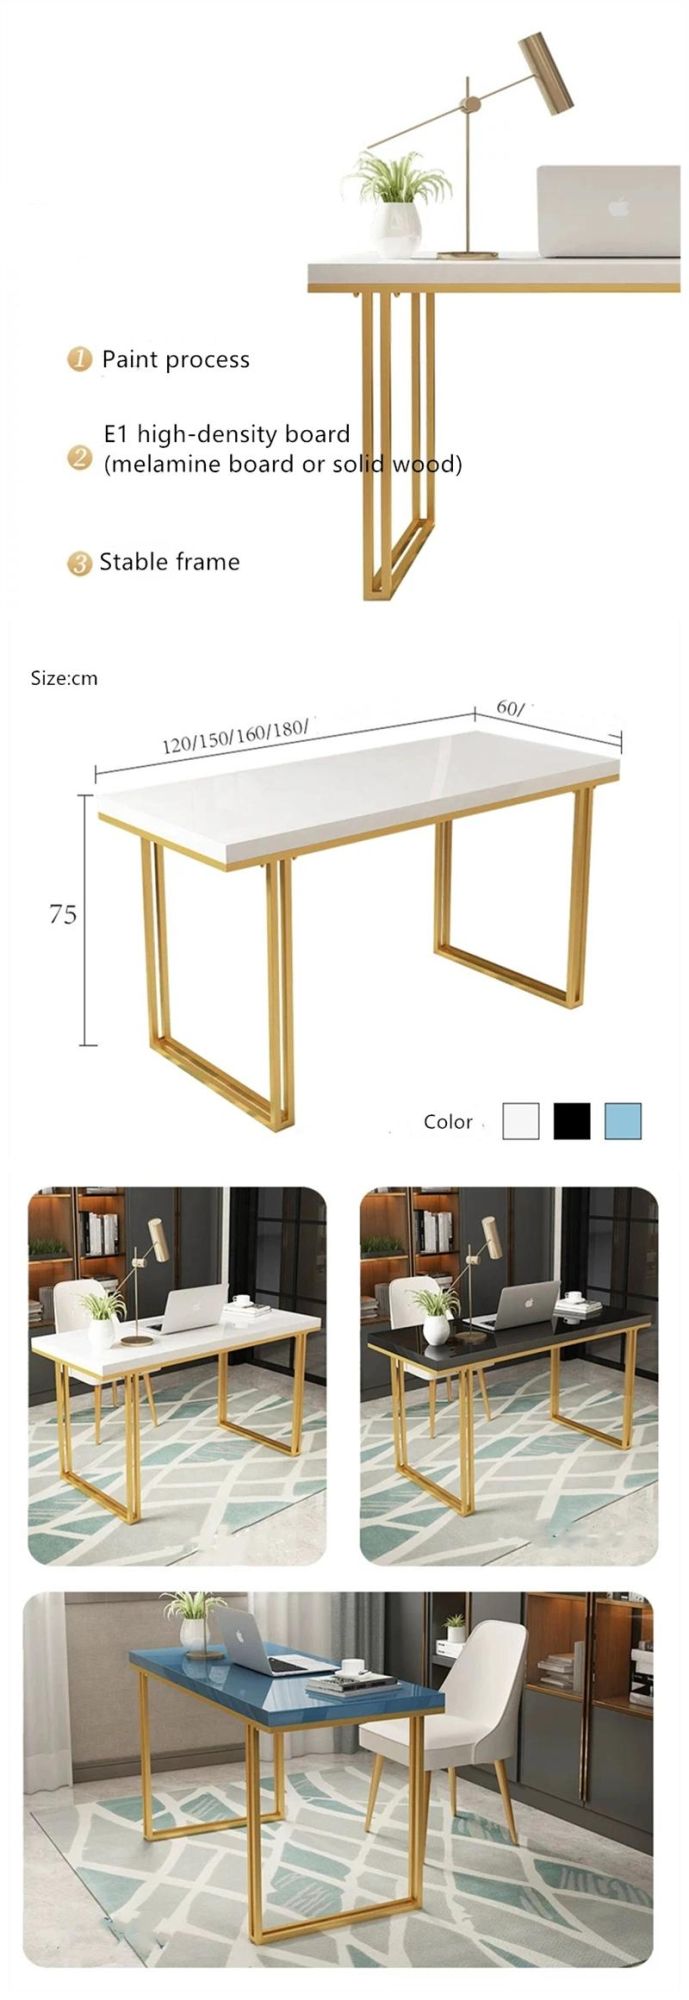 Stainless Steel Wooden Rose Gold Wedding Rectangle Dining Table Chair Dining Room Furniture Sets